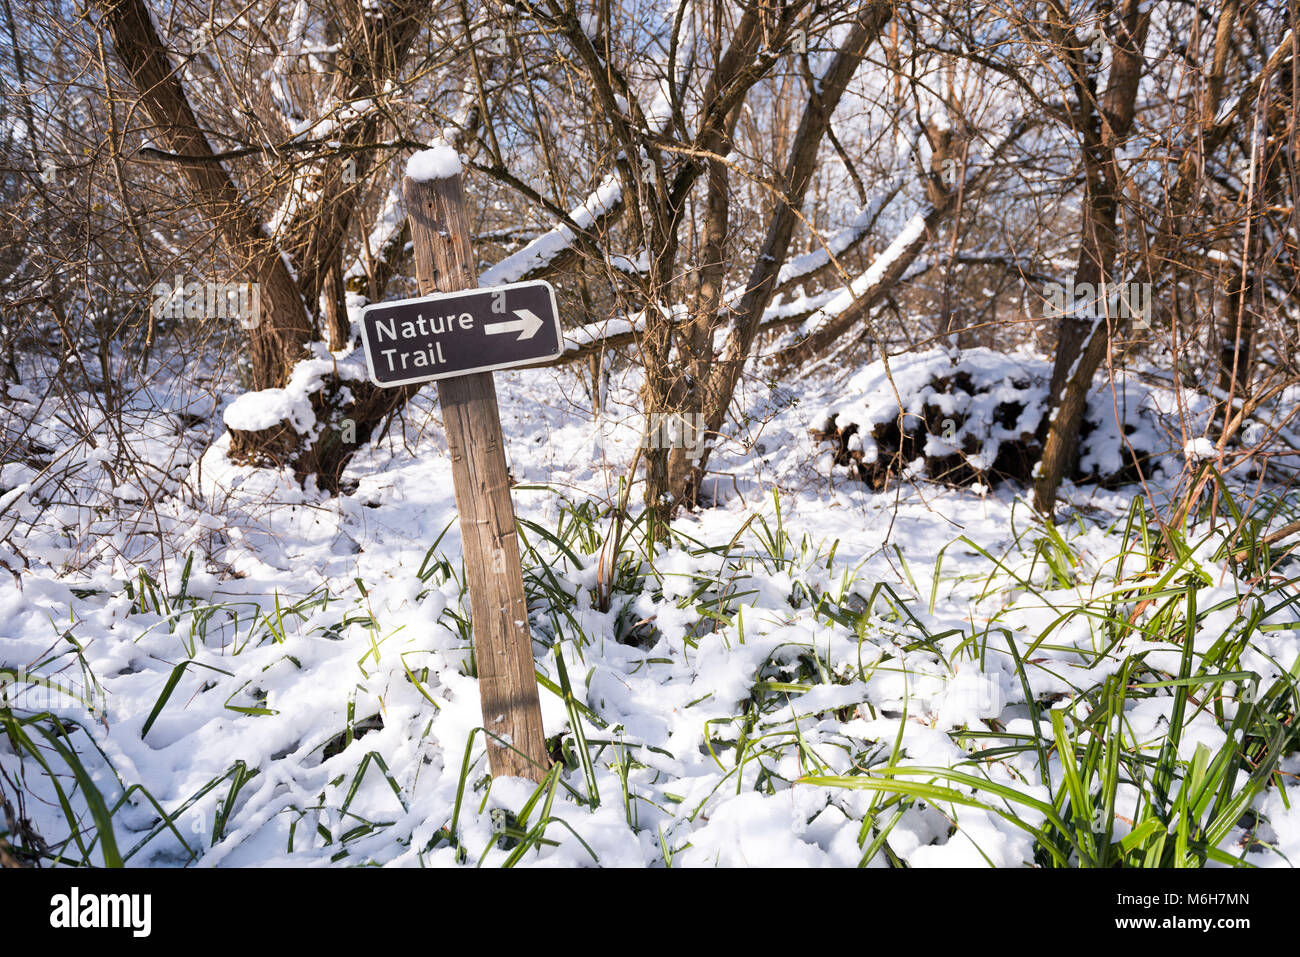 Nature trail sign on a hiking path in a snow covered forest Stock Photo